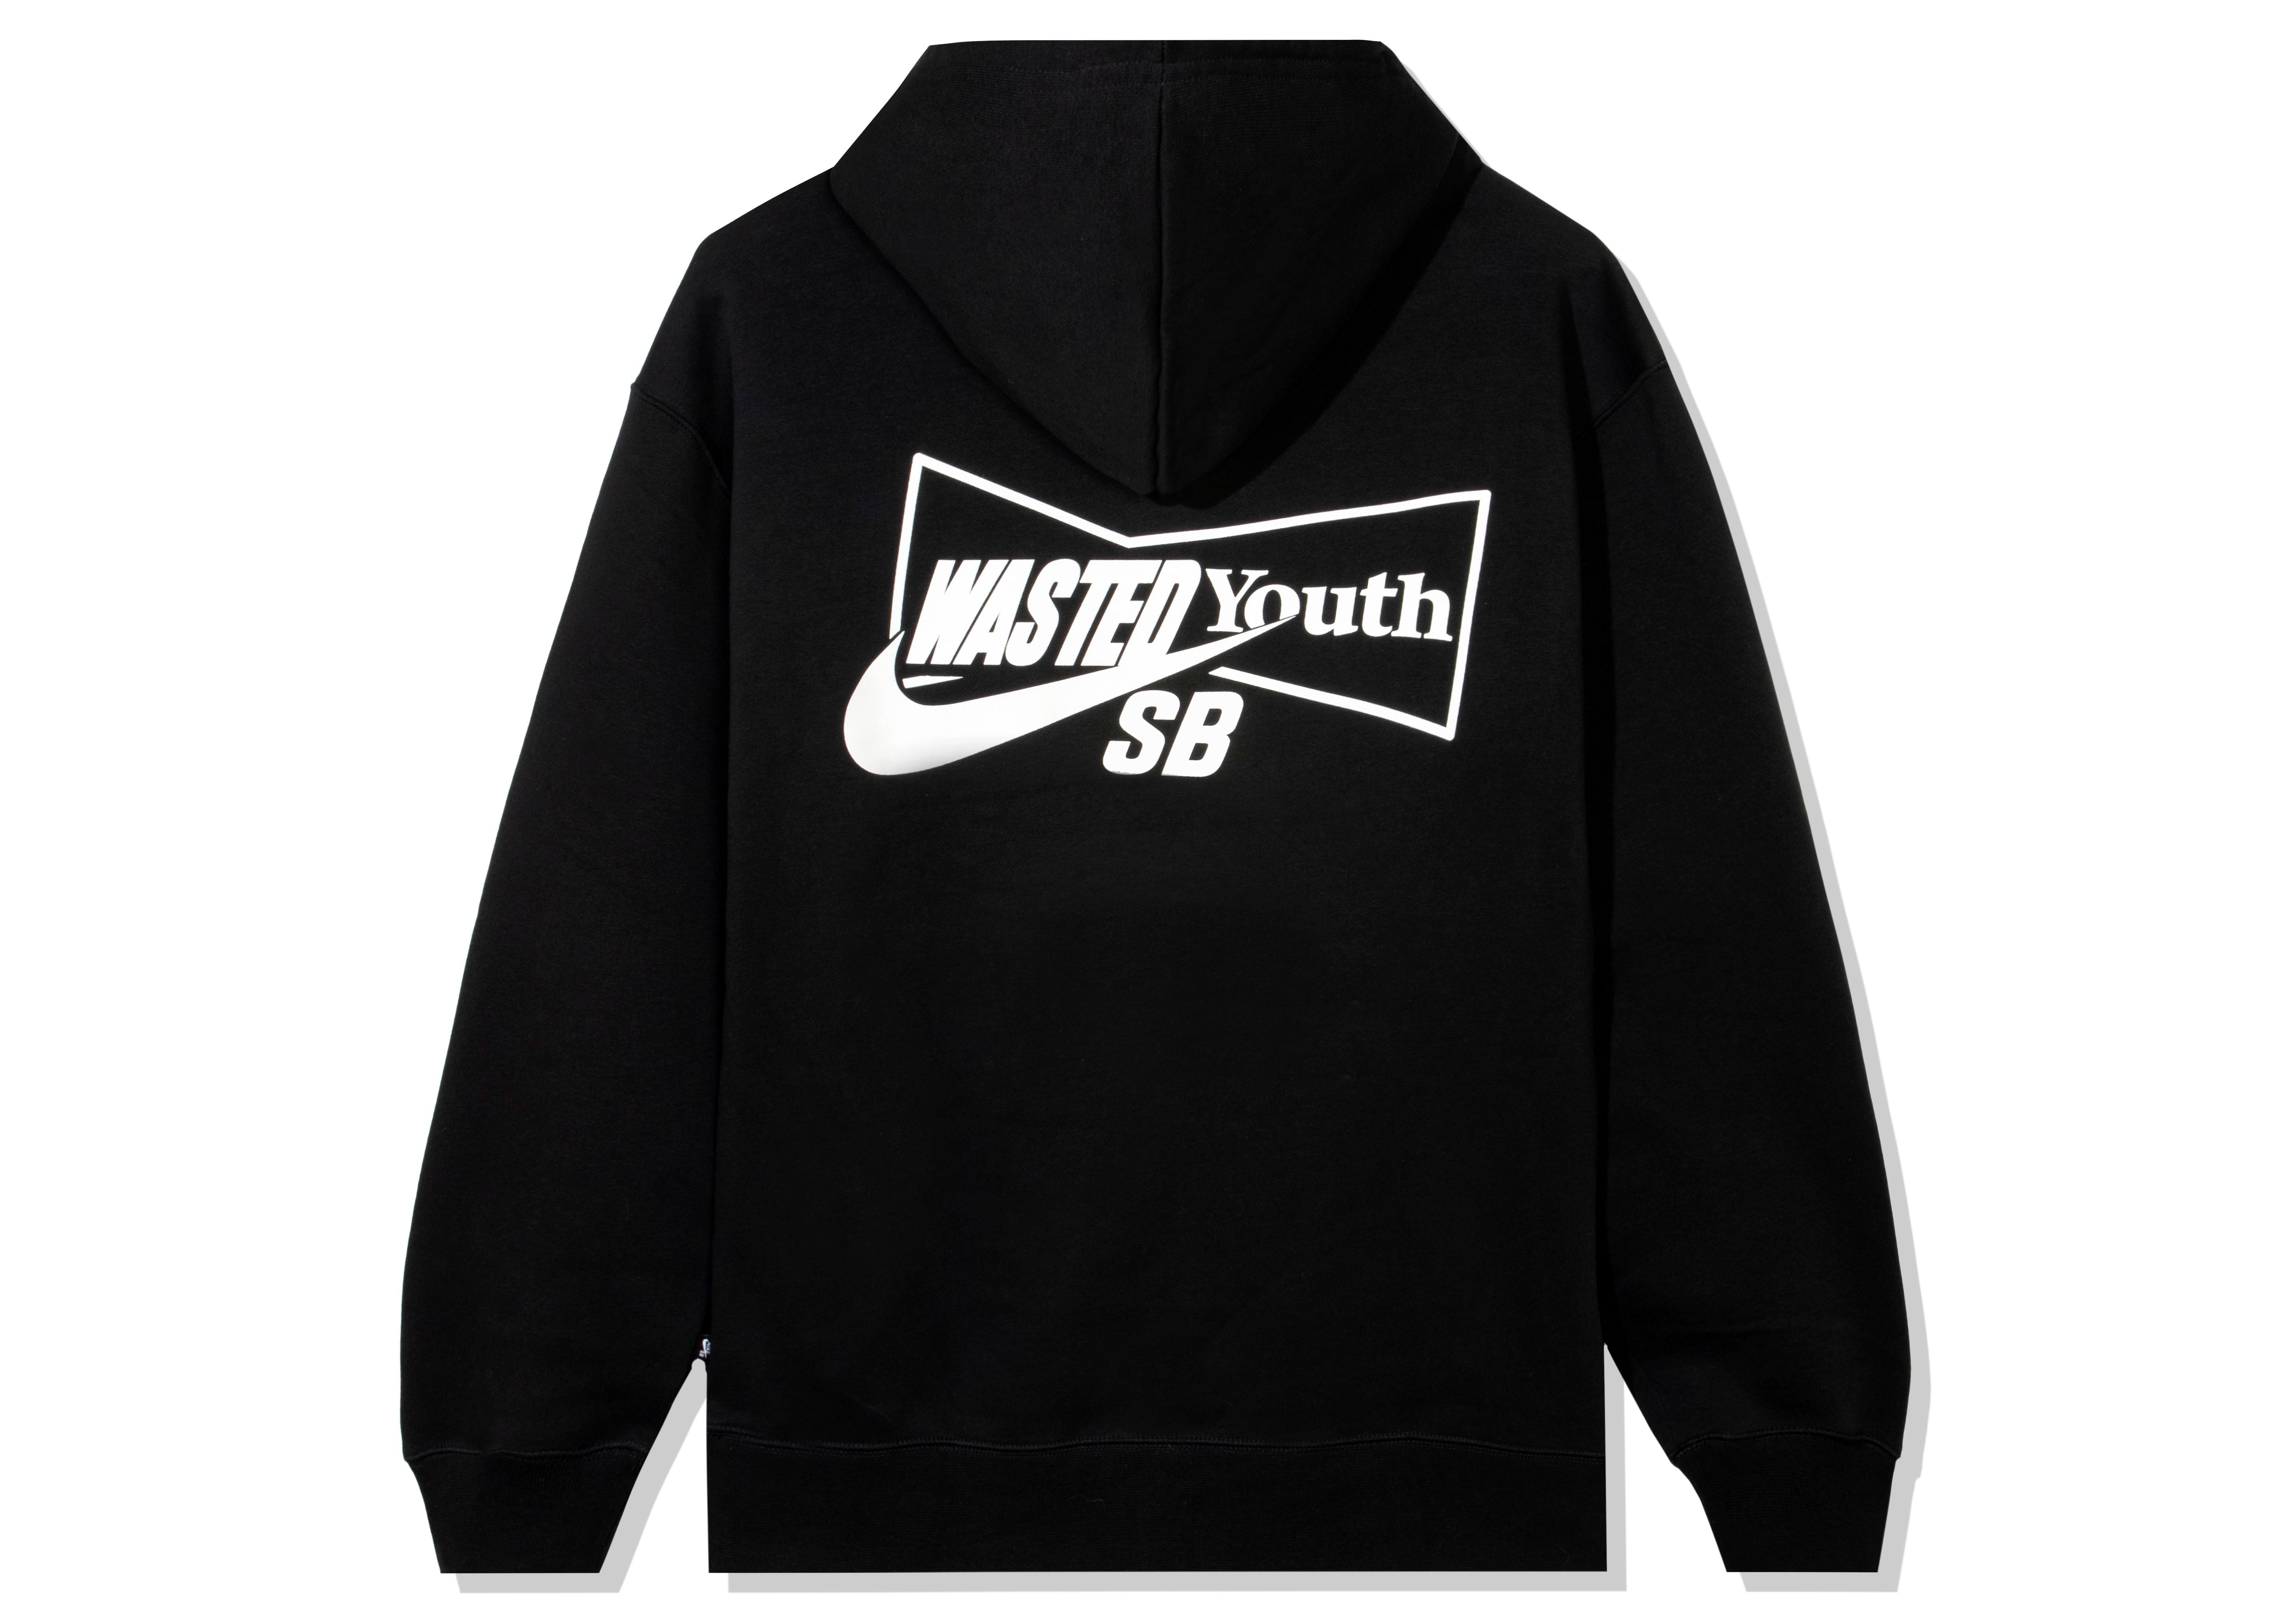 Wasted Youth HOODIE #2 Black XL | www.myglobaltax.com